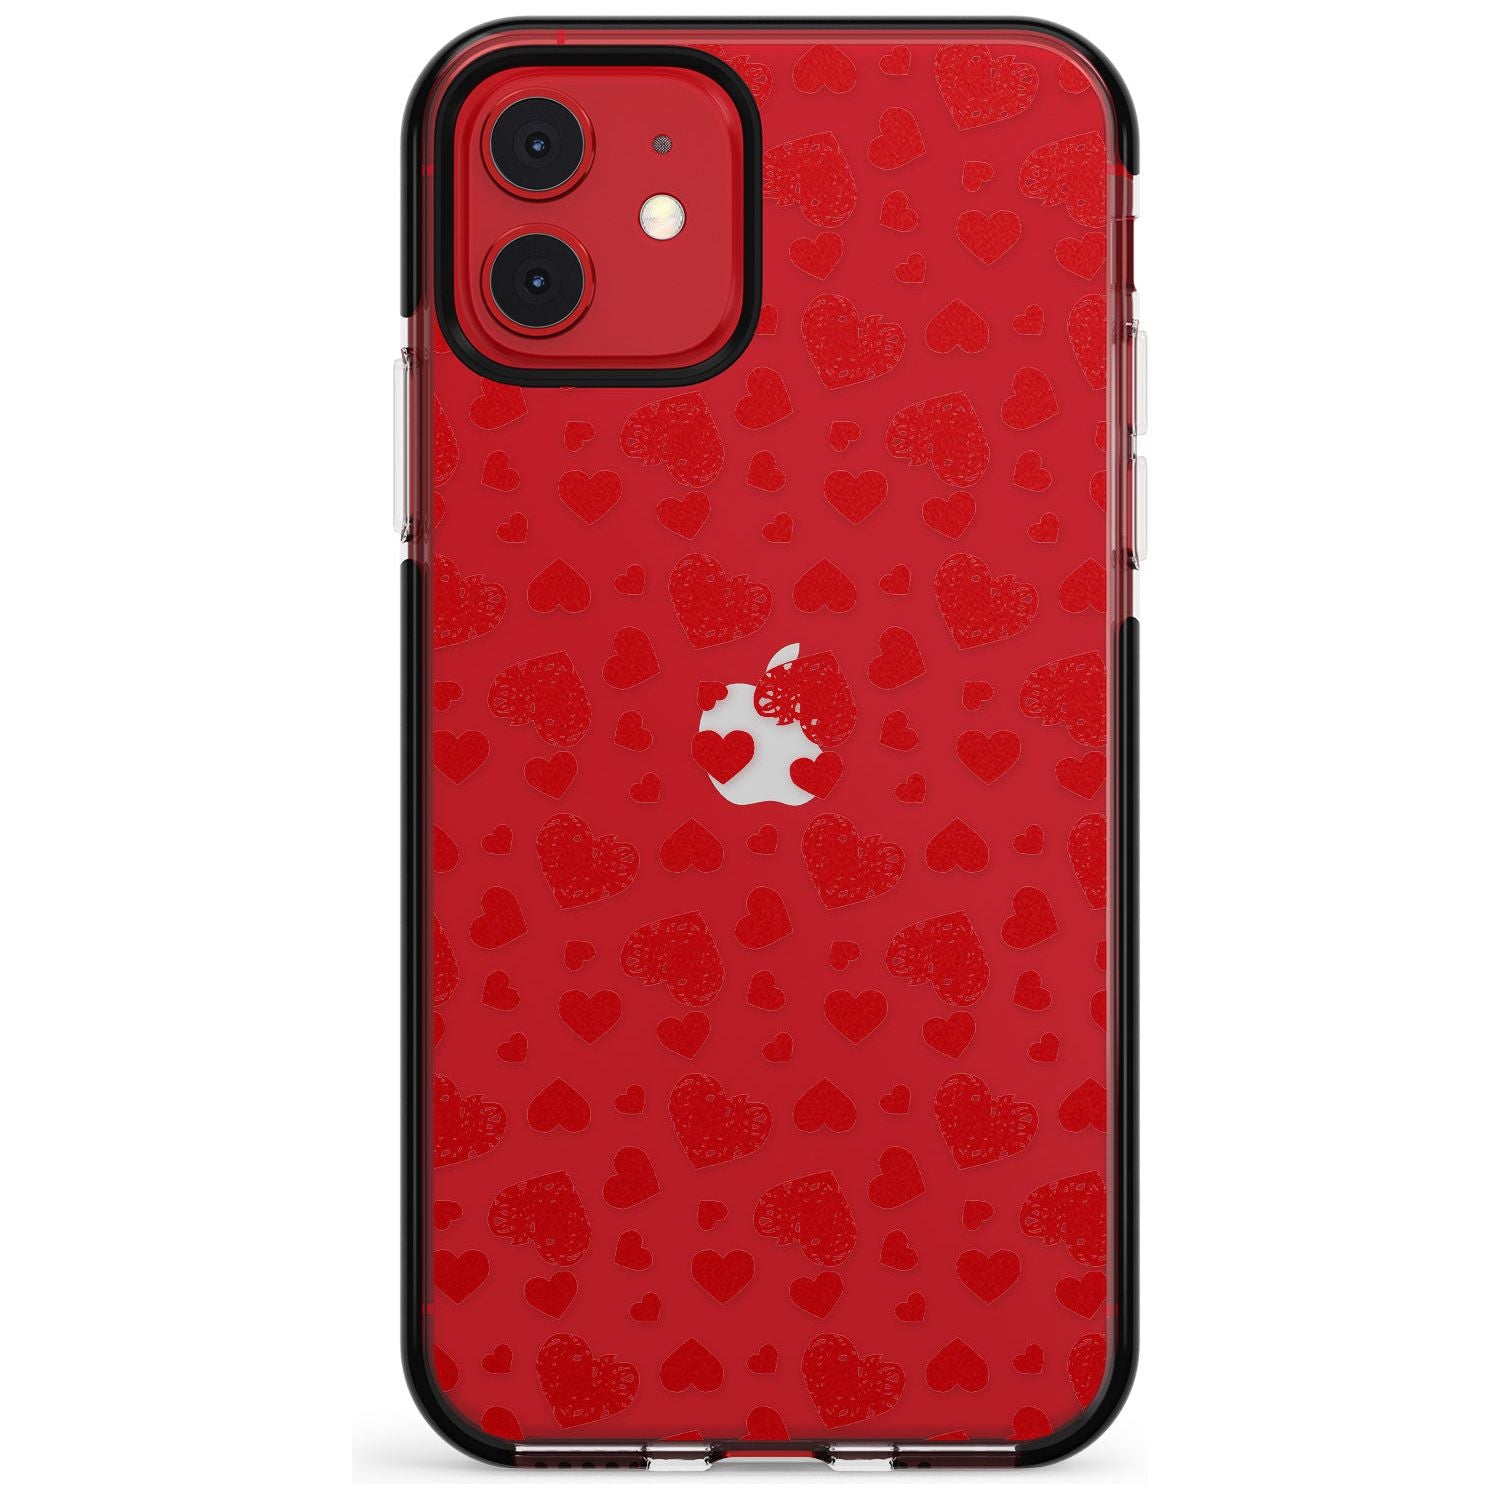 Sketched Heart Pattern Pink Fade Impact Phone Case for iPhone 11 Pro Max